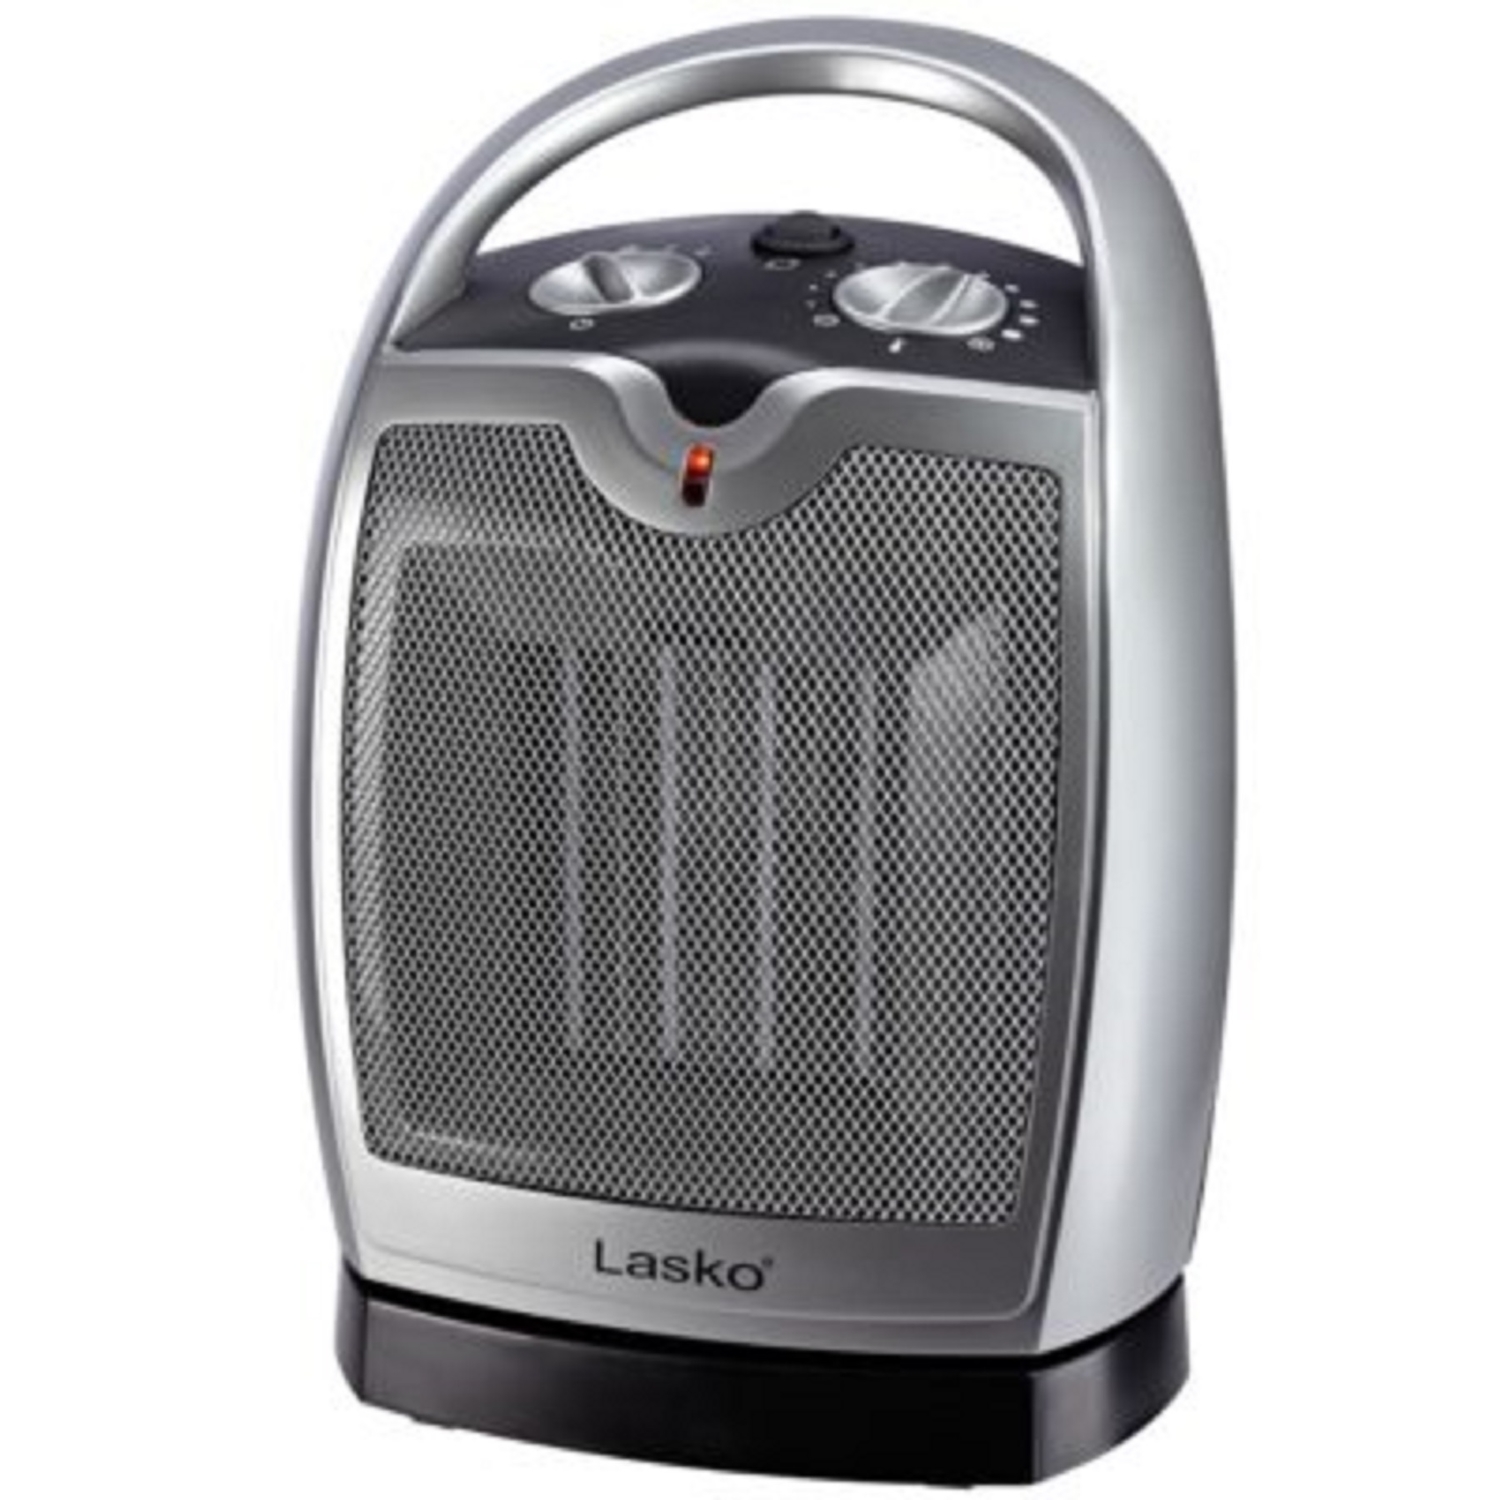 Photos - Other Heaters Lasko 175 sq ft Electric Oscillating Heater 5409 